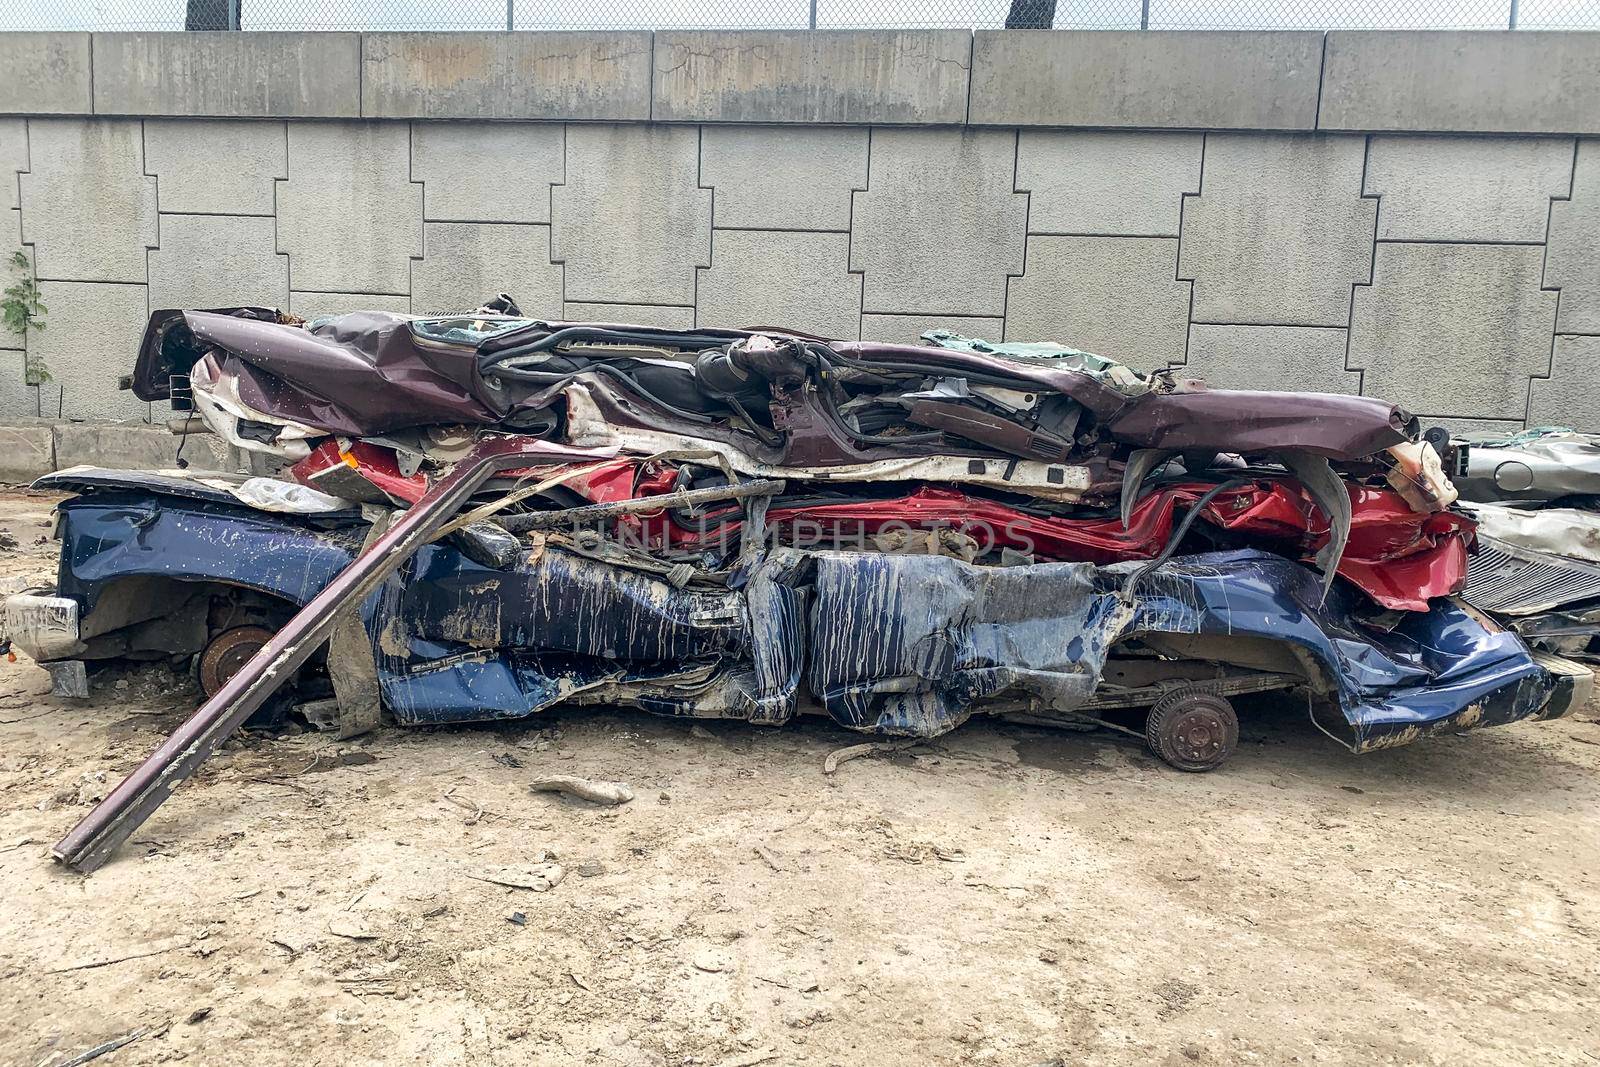 A pile of compressed cars going to be shredded, crushed junk vehicles on scrapyard